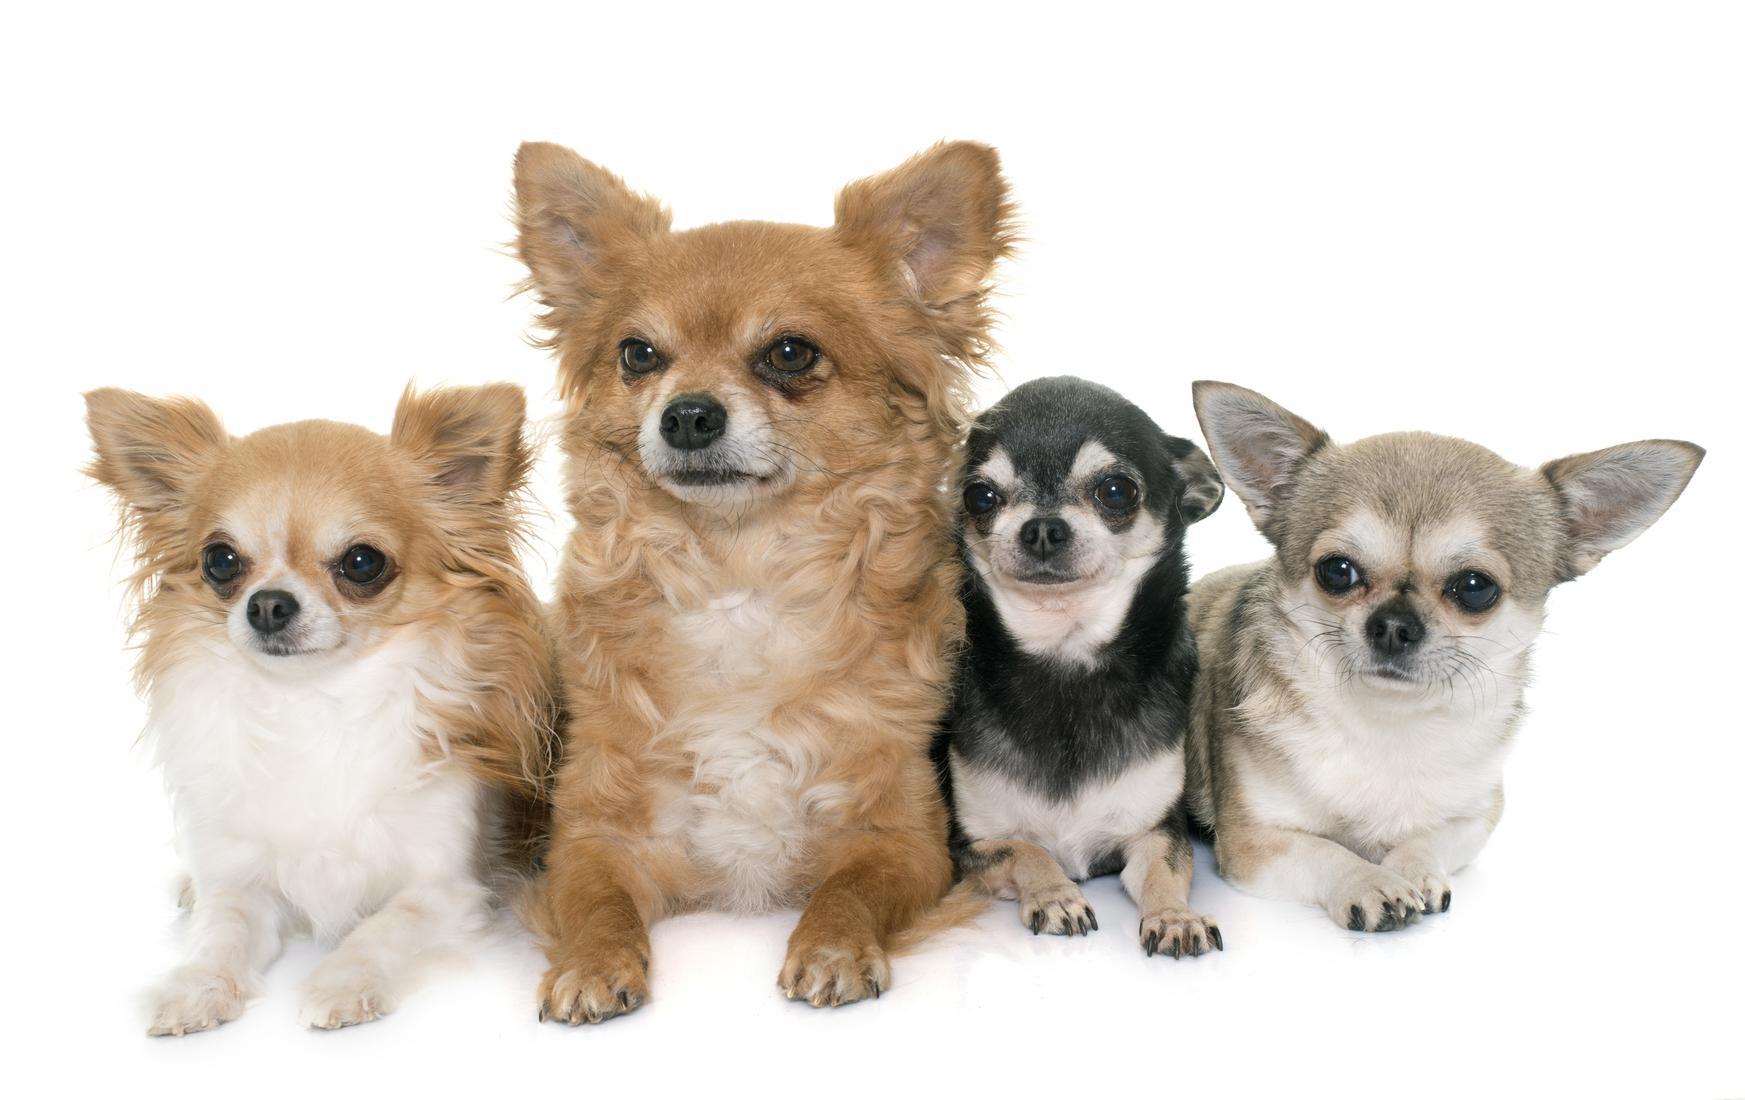 Are there different types of Chihuahuas?